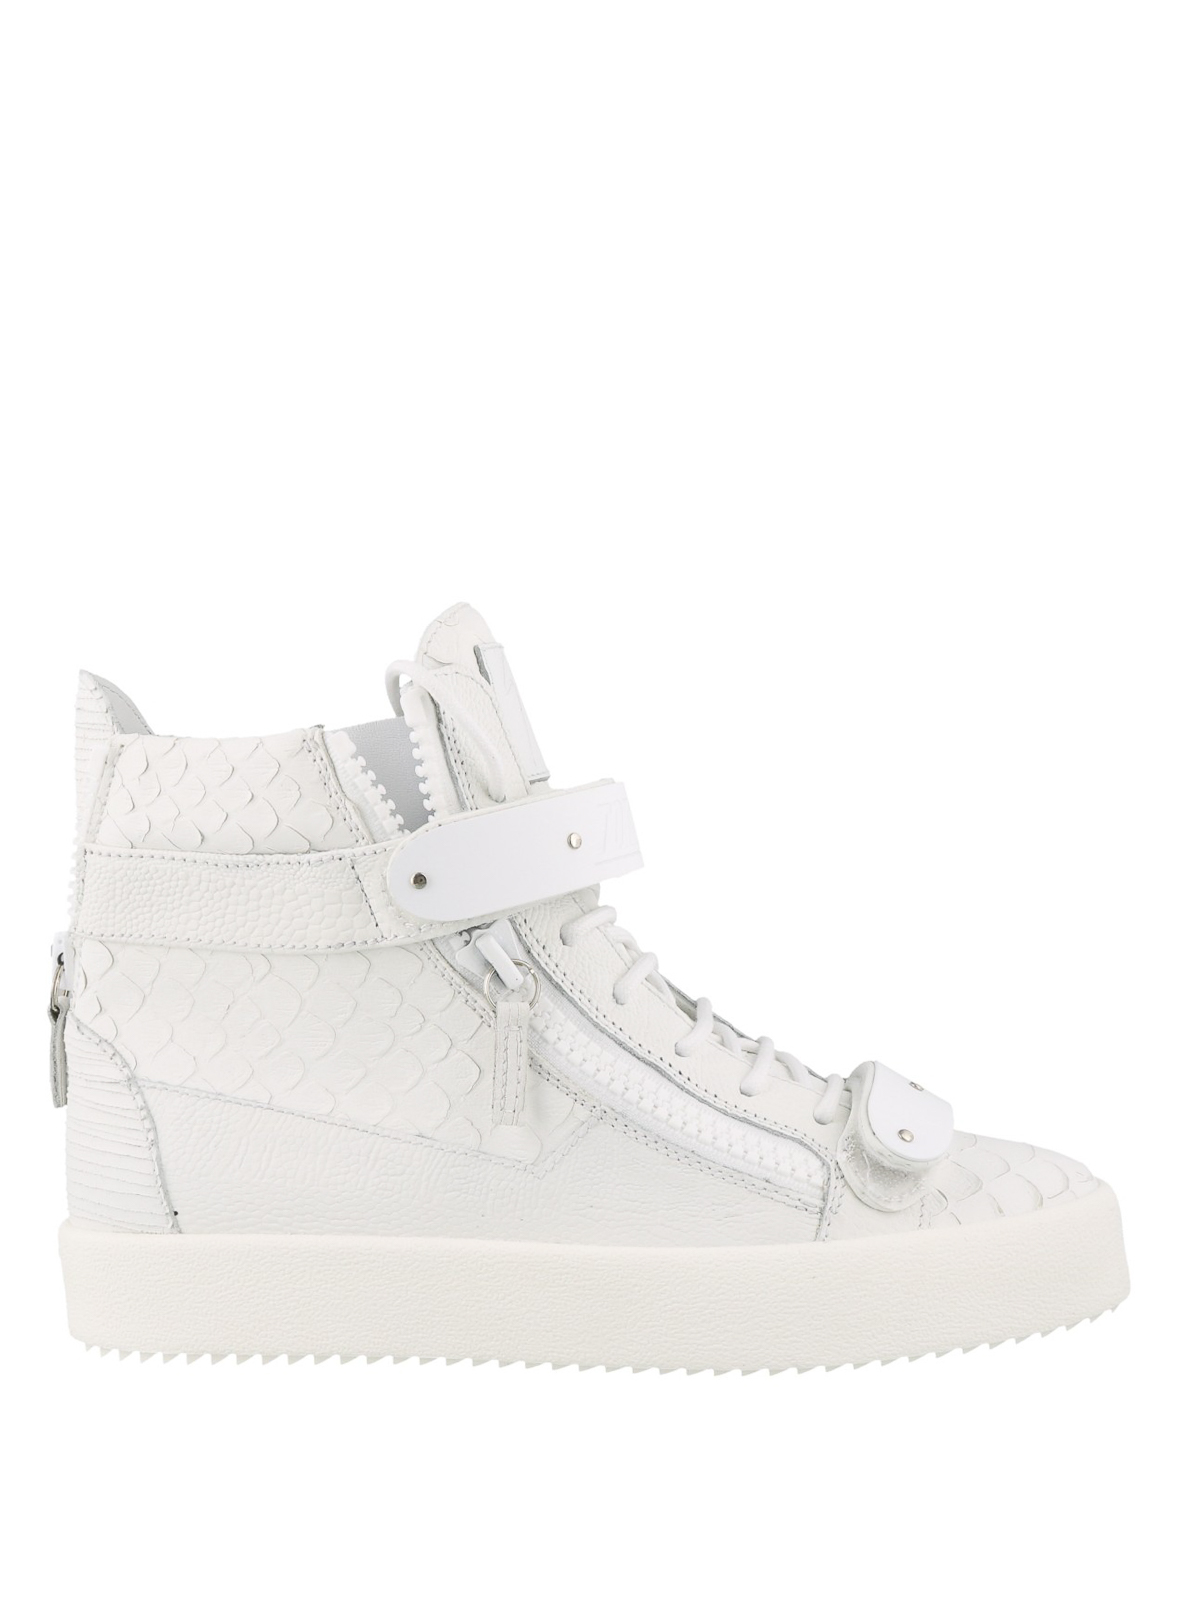 Trainers Giuseppe Zanotti - Coby white leather high top sneakers ...